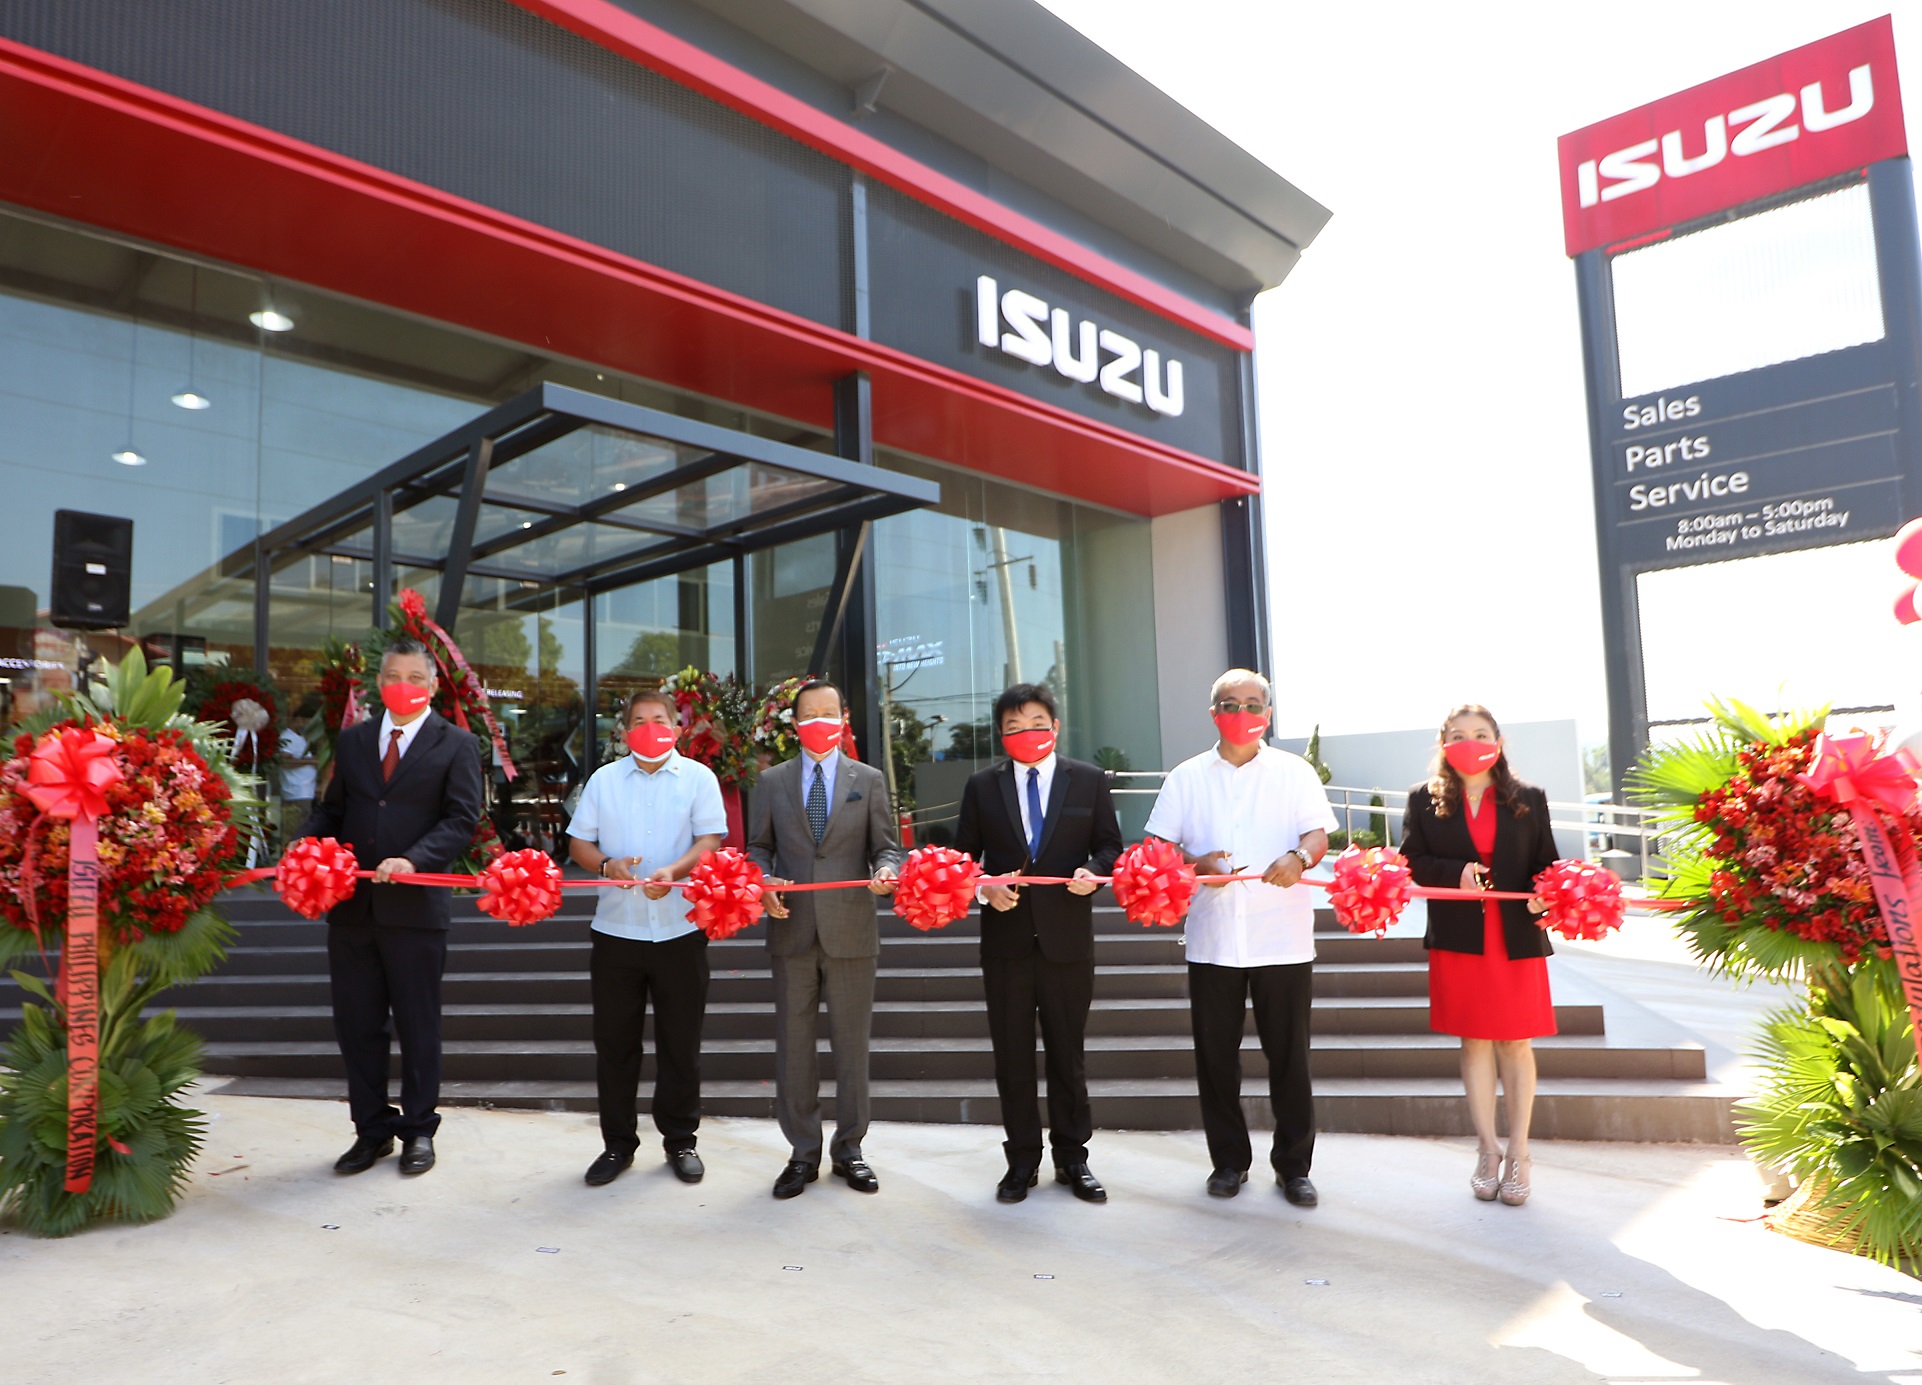 ISUZU EXPANDS FURTHER TO SERVE CUSTOMERS IN THE NORTH WITH ISUZU LA UNION GRAND OPENING image